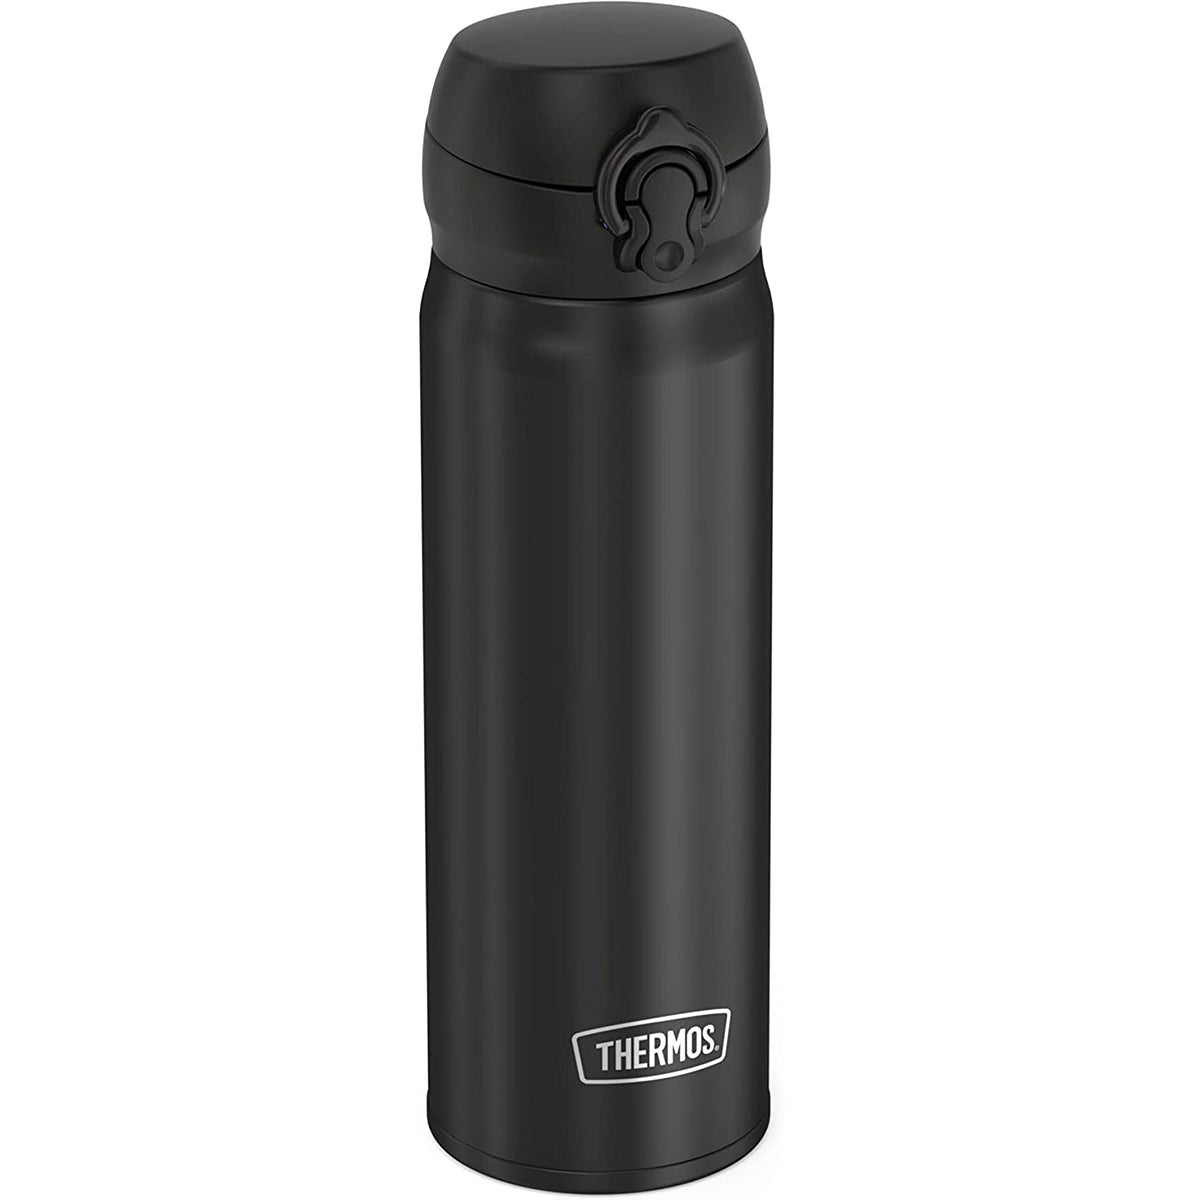 Thermos 16 oz. Vacuum Insulated Stainless Steel Direct Drink Bottle - Black Thermos